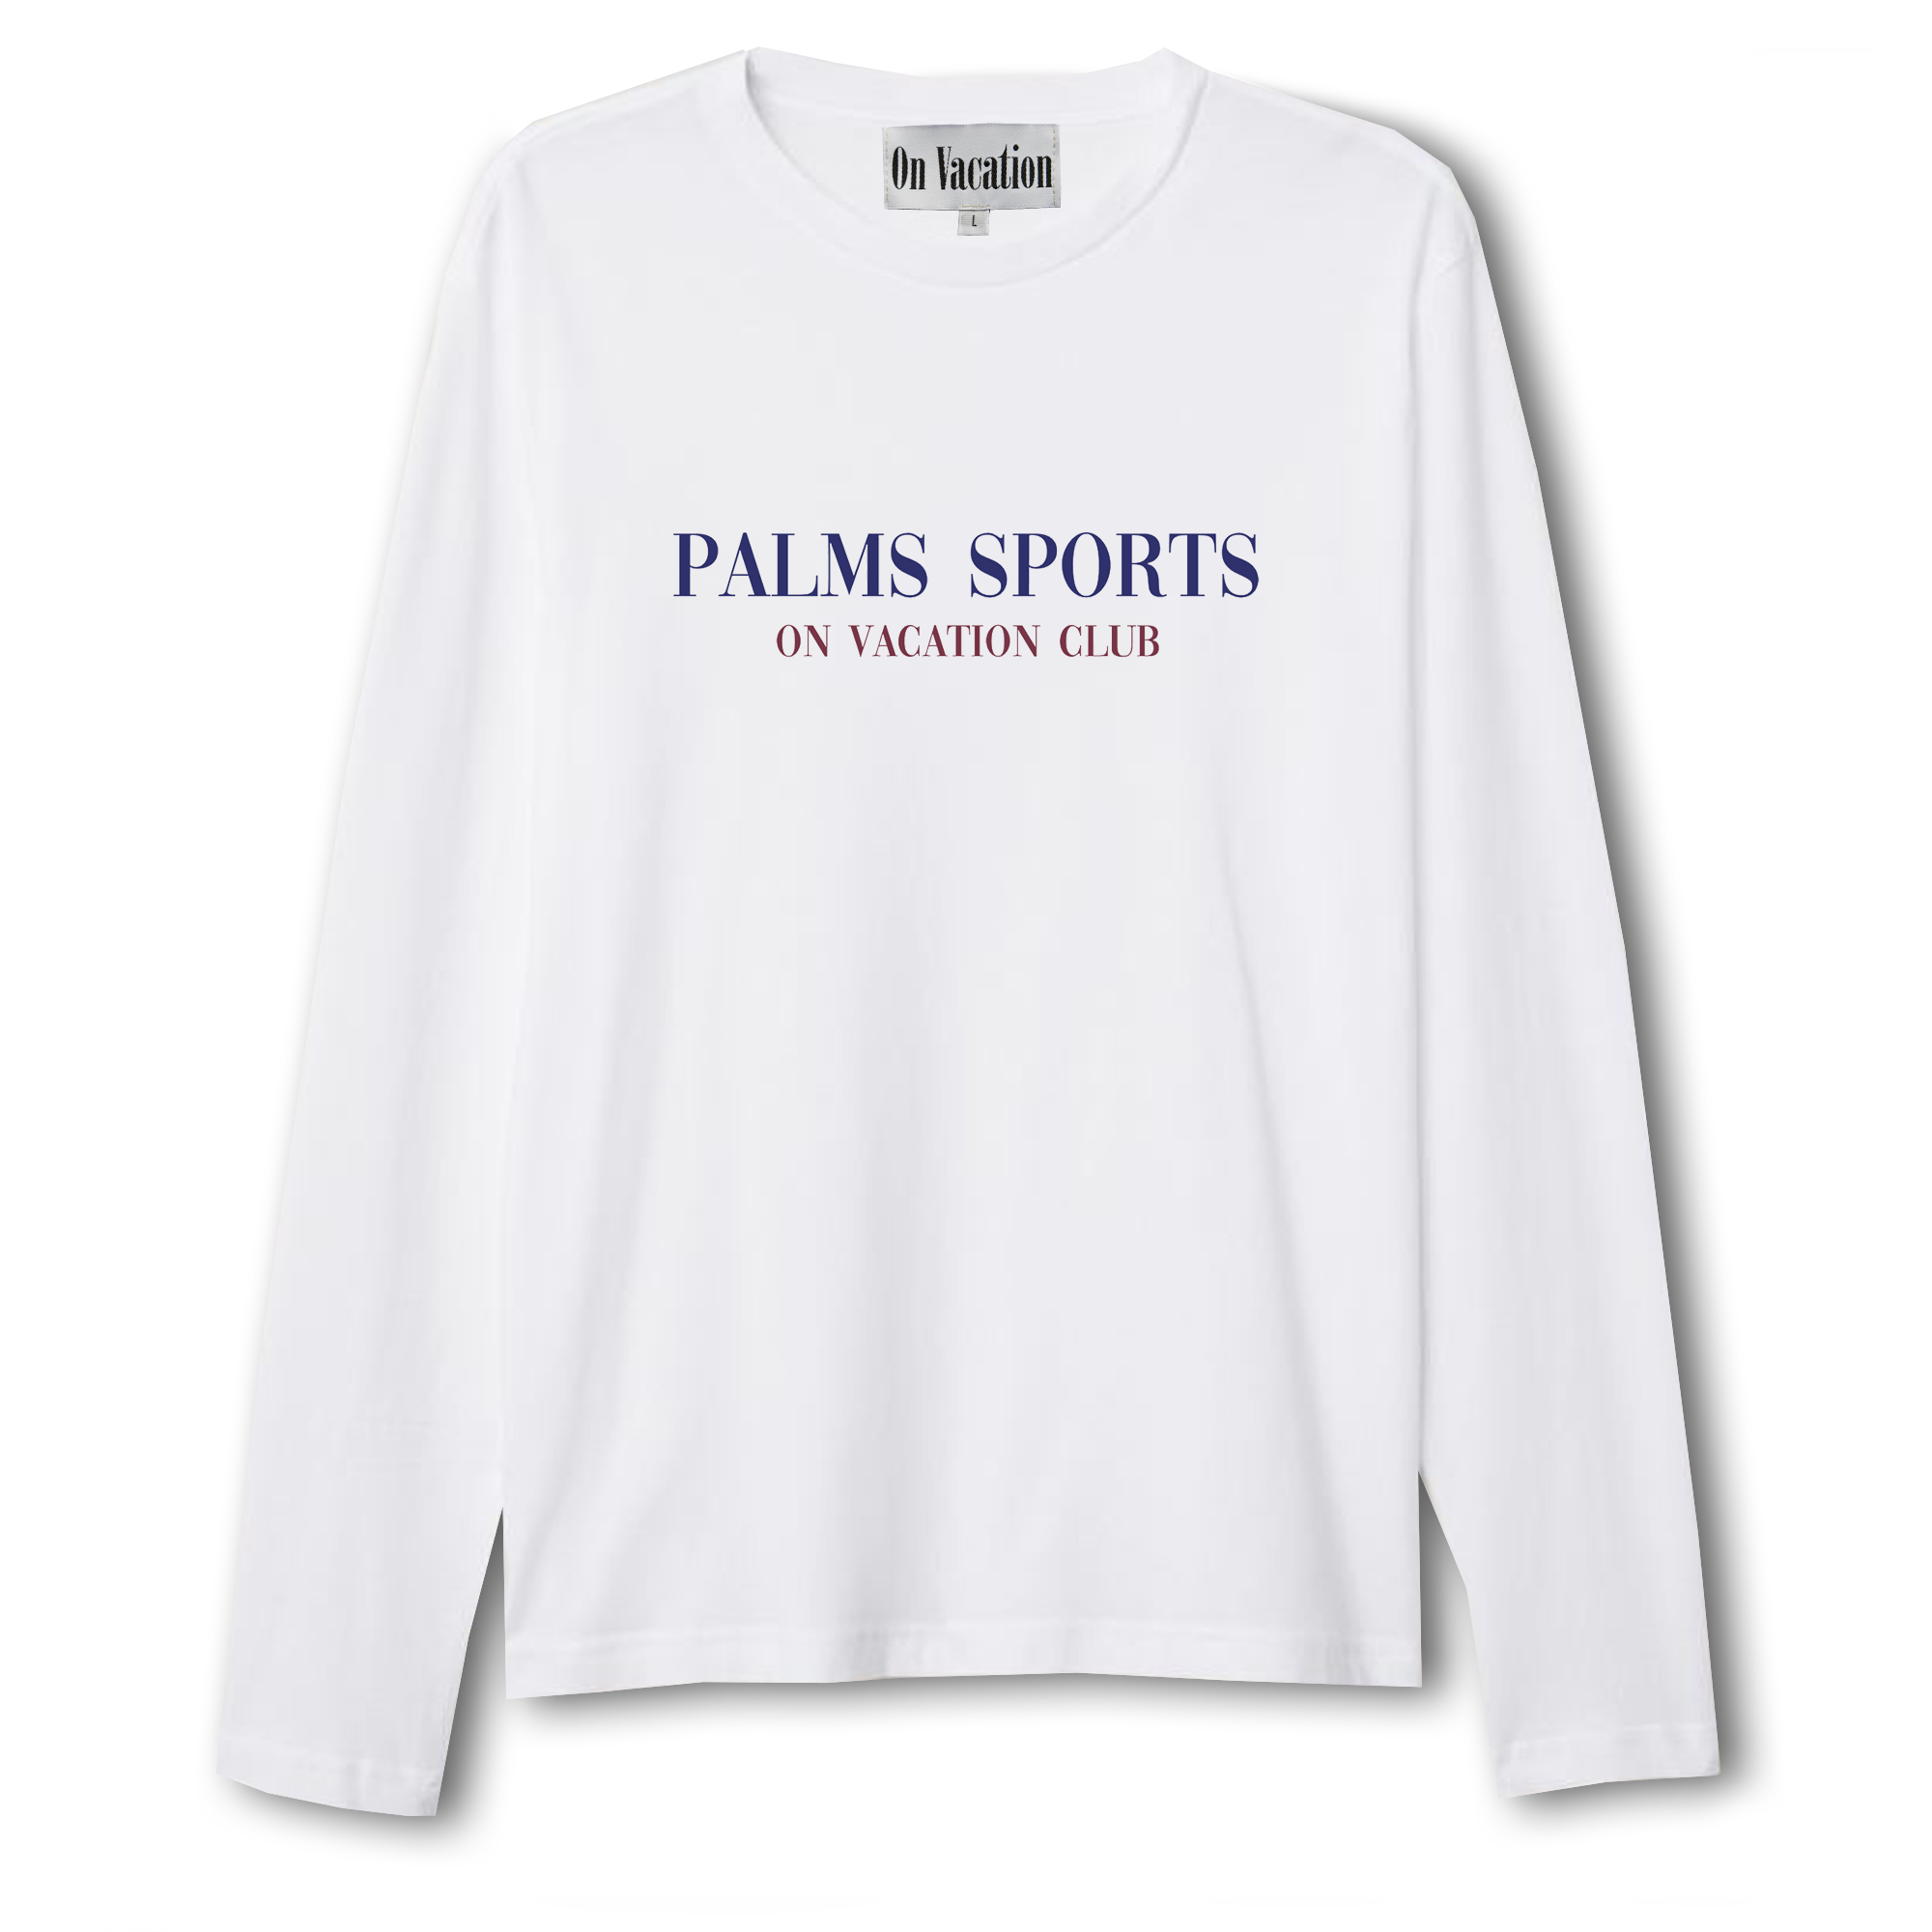 On Vacation Ladies Sports Longsleeve "Palms" - White